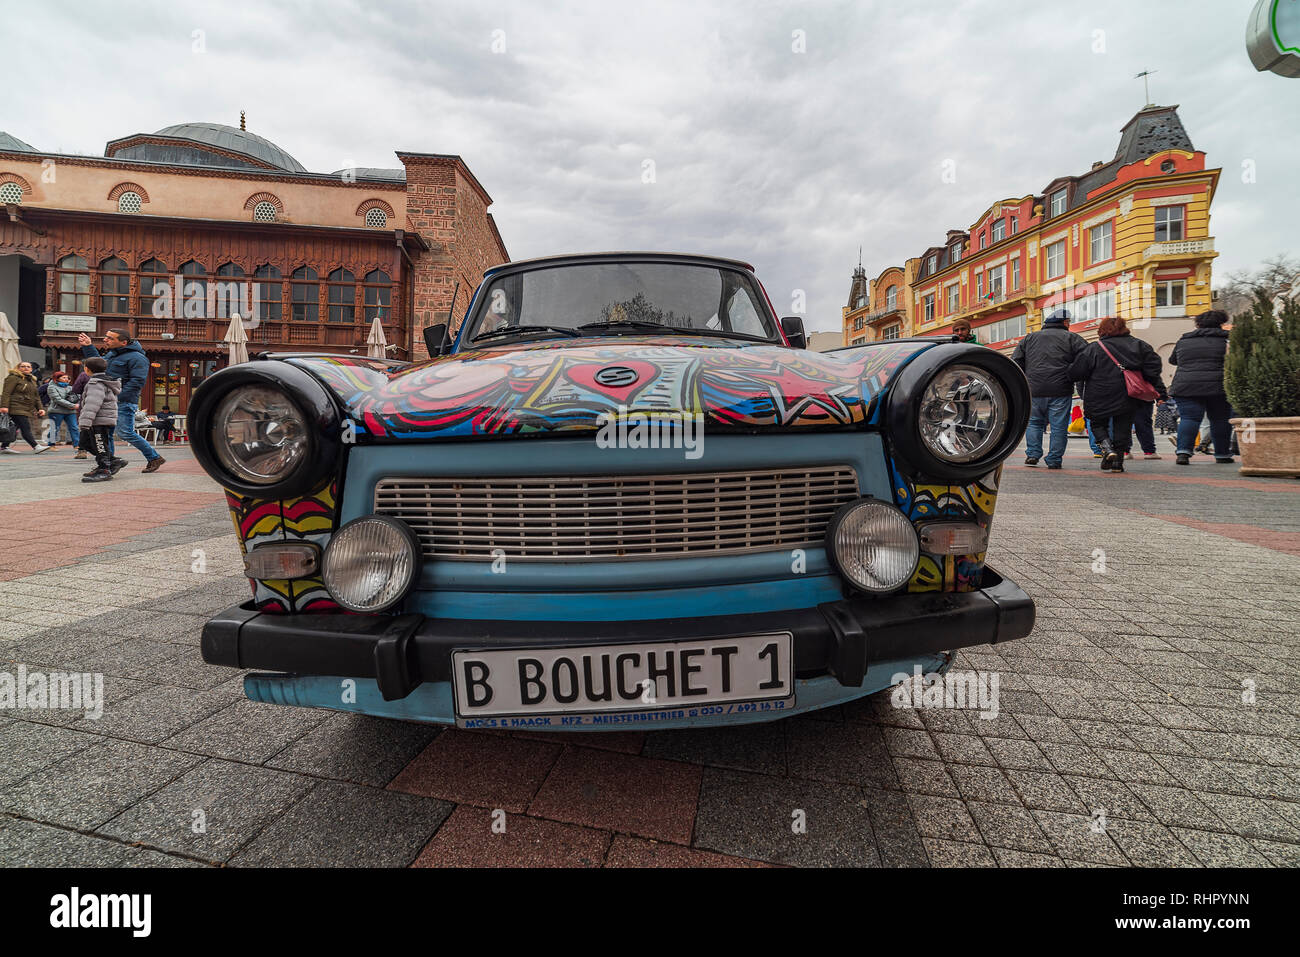 Plovdiv city / Bulgaria: Trabant car art painted by original artist of the Berlin Wall - expose in central square in Plovdiv city Stock Photo